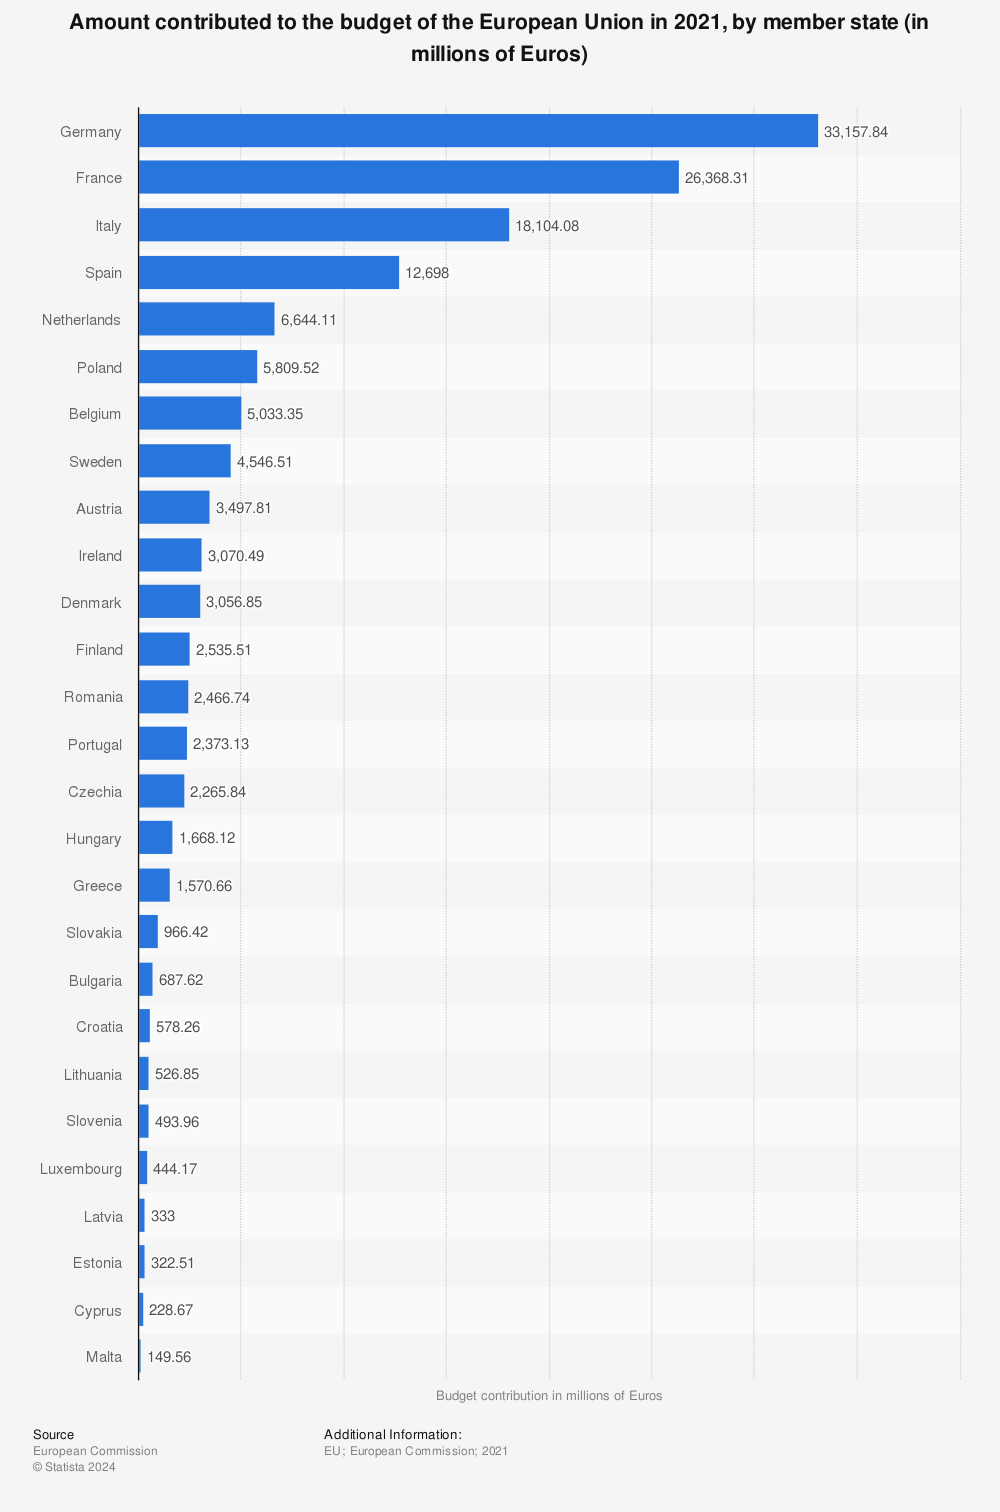 Statistic: Amount contributed to the budget of the European Union in 2021, by member state (in millions of Euros) | Statista